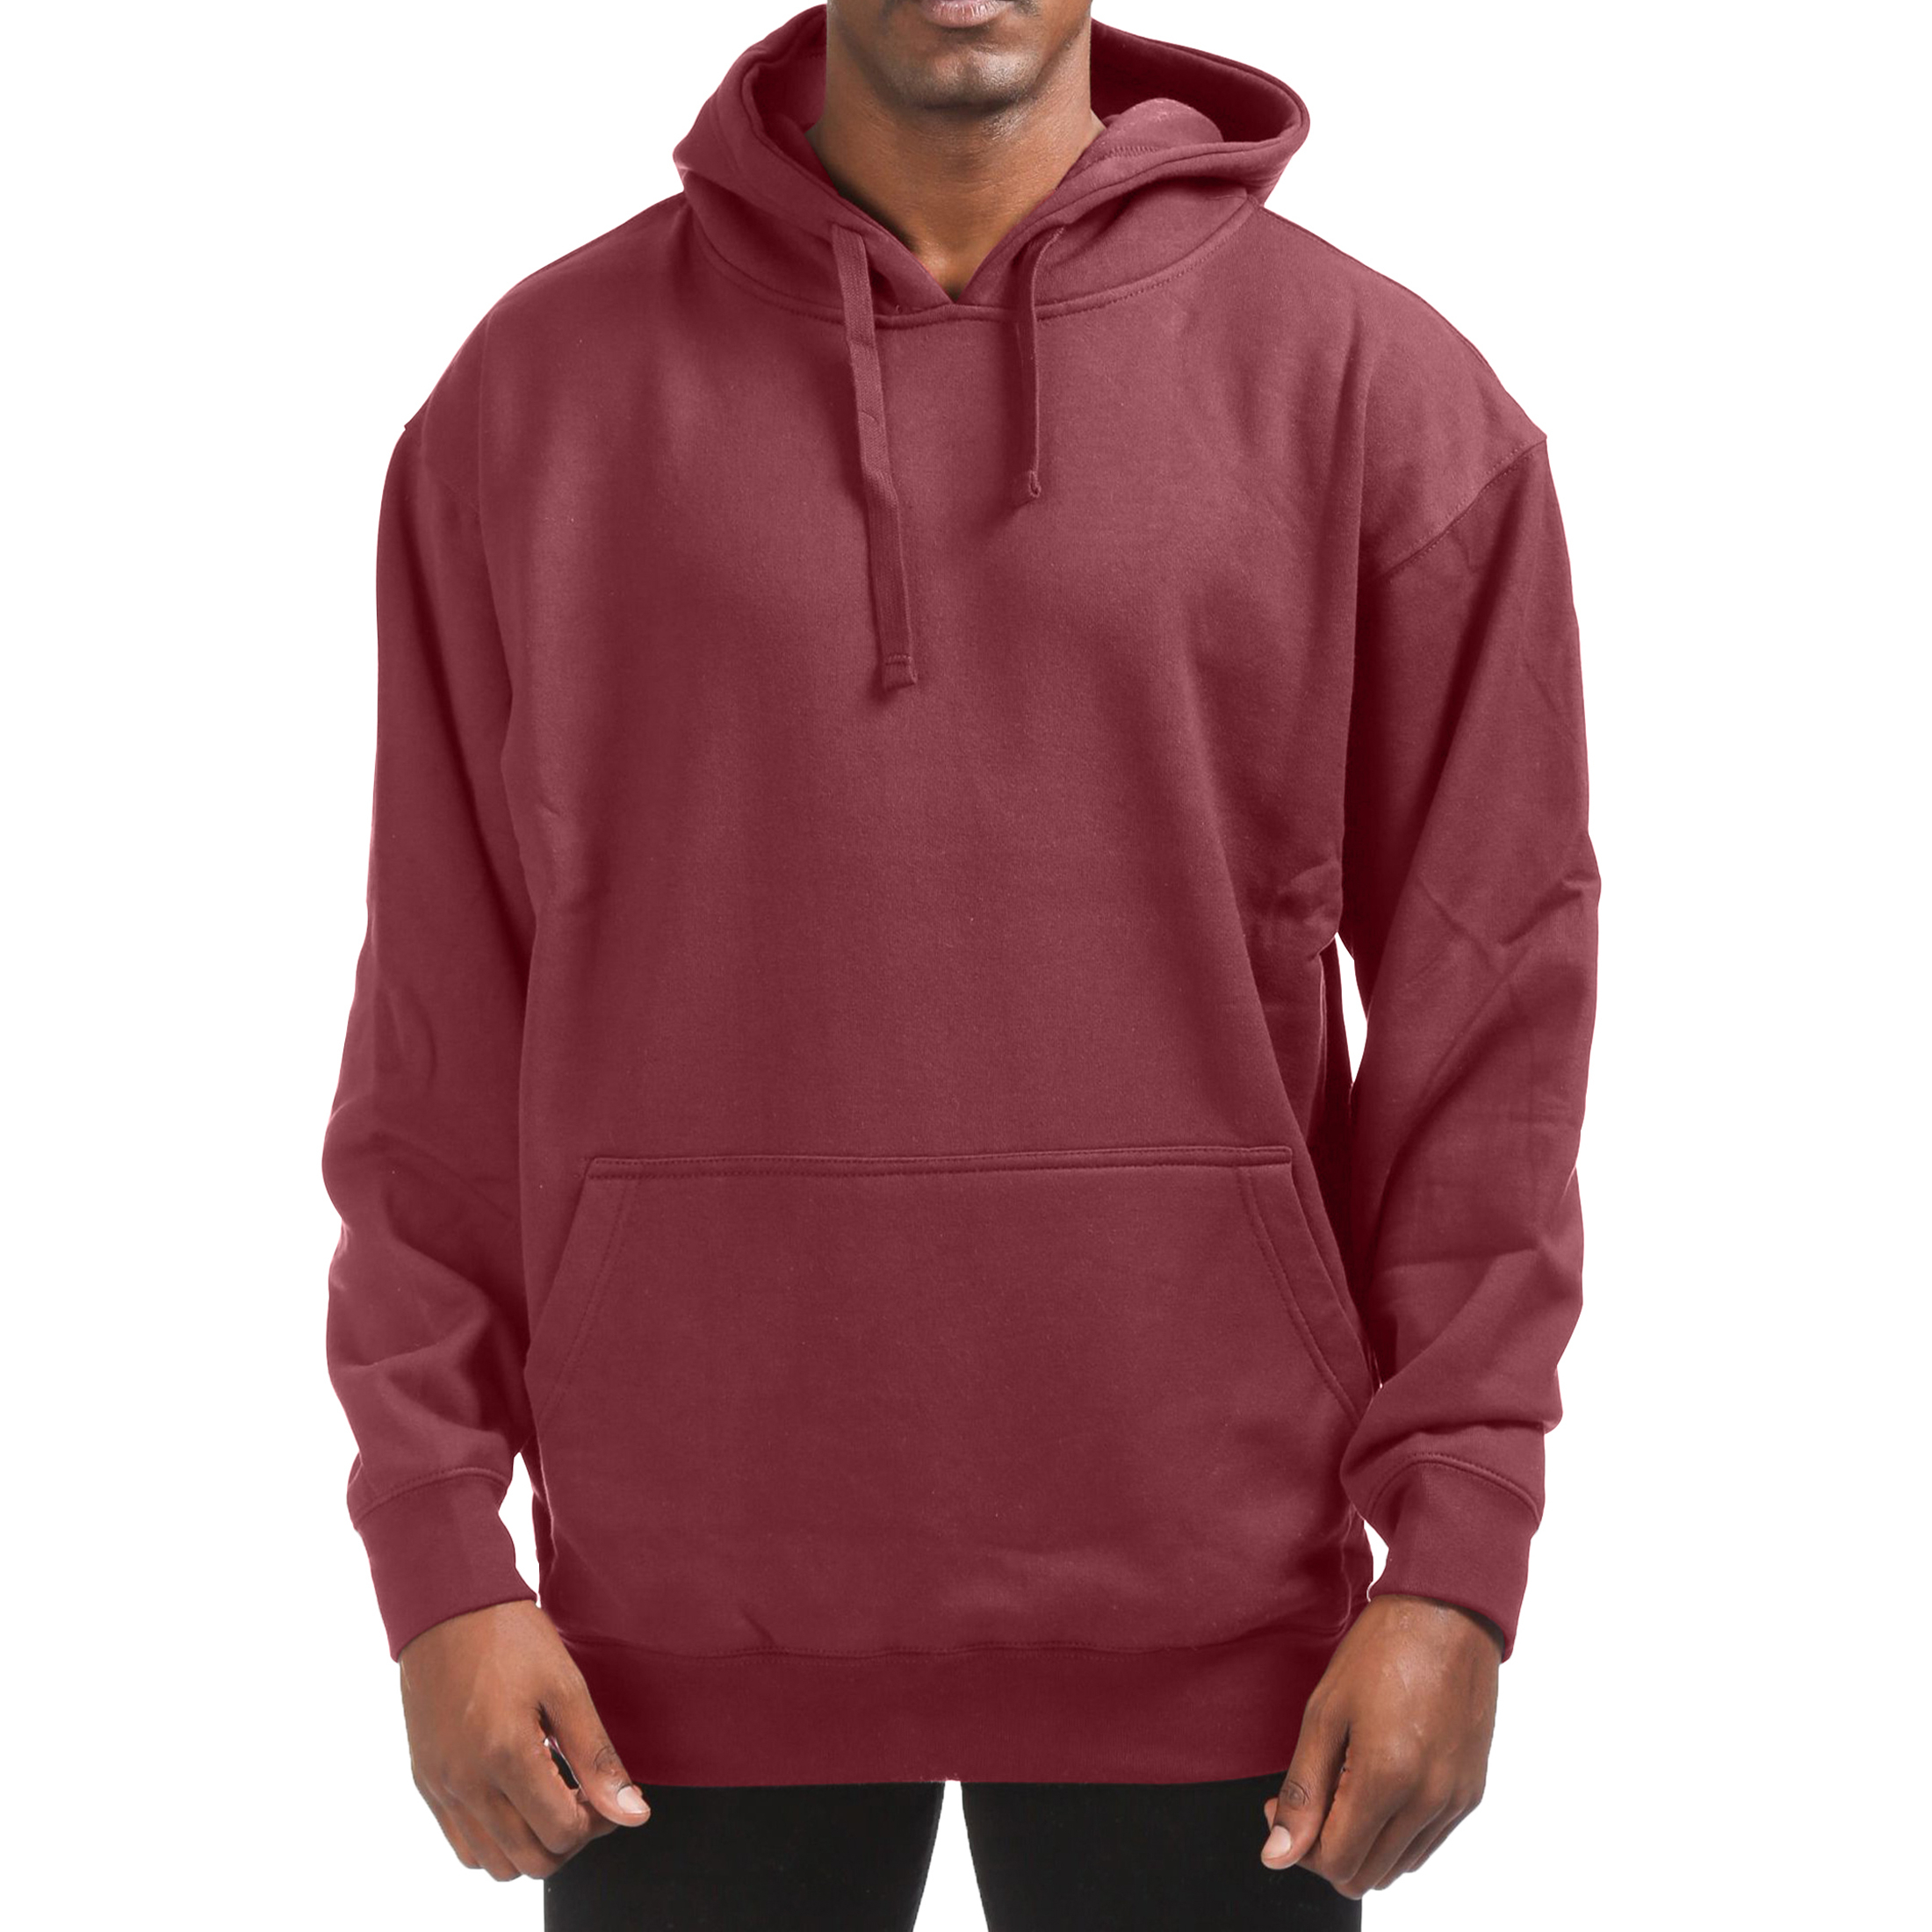 Men's Cotton-Blend Fleece Pullover Hoodie With Pocket (Big & Tall Sizes Available) - Burgundy, 4X-Large